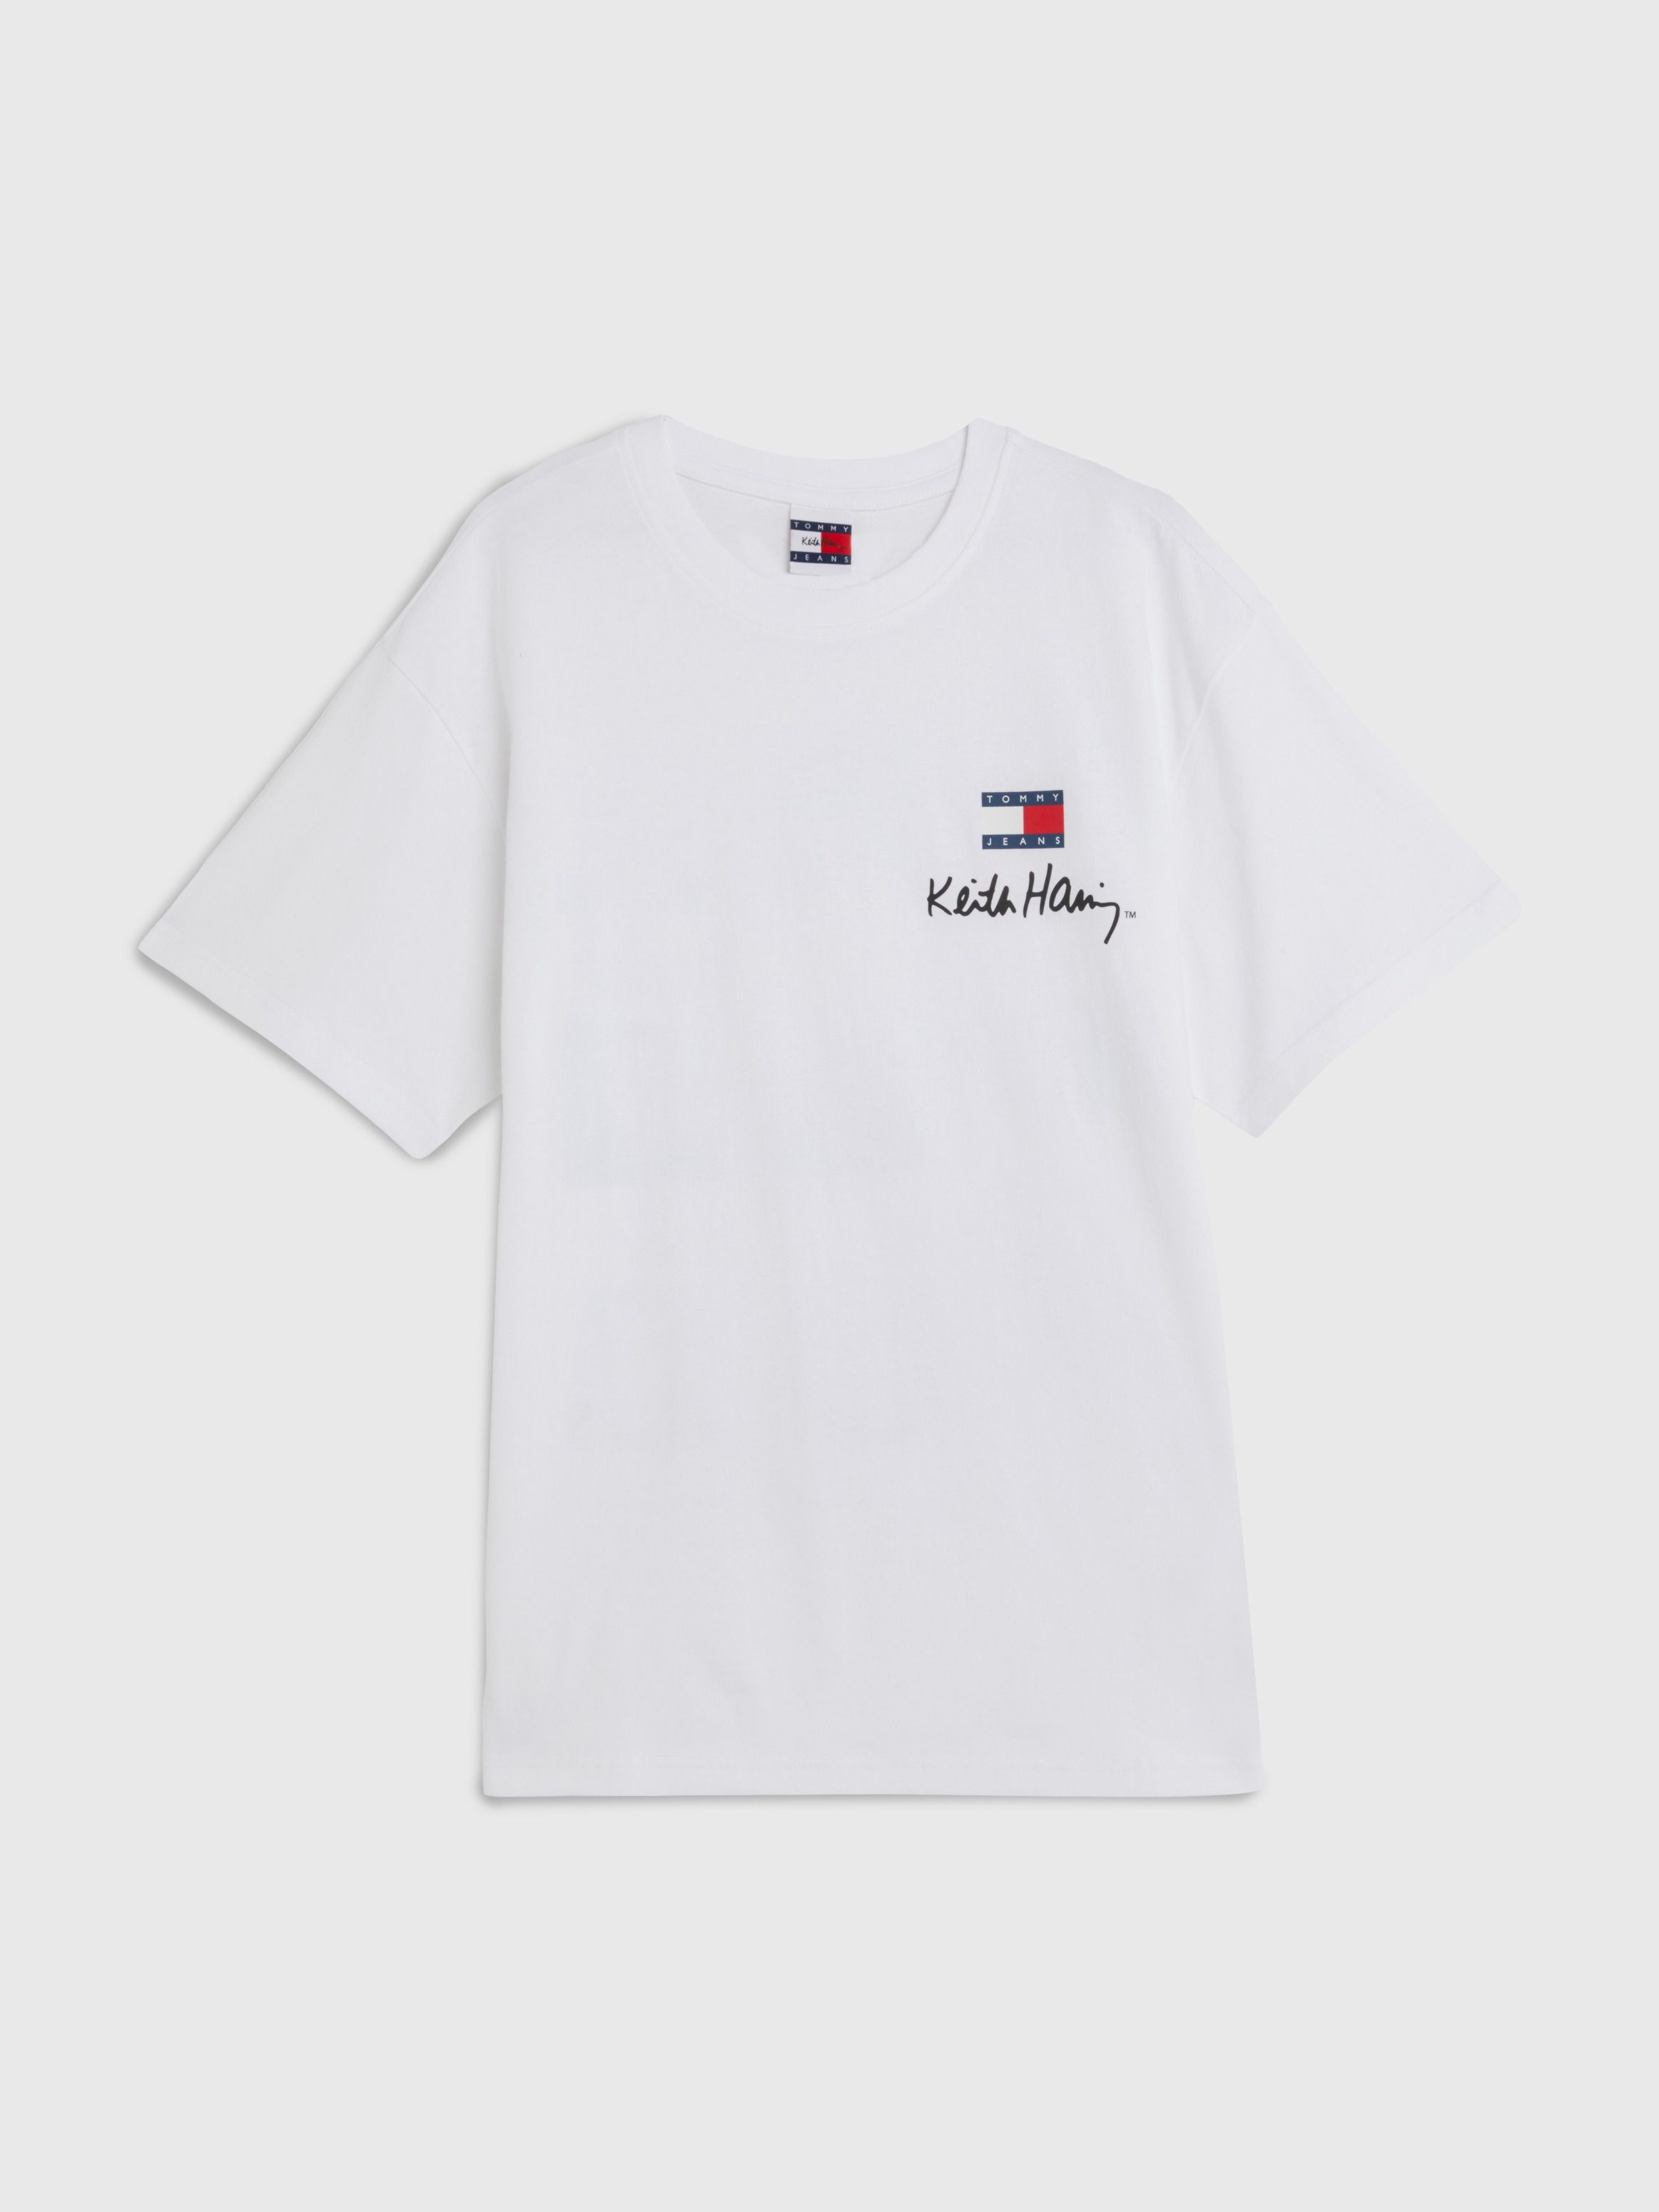 Tommy x Keith Haring Dual Gender Relaxed Fit T-Shirt | Tommy Hilfiger